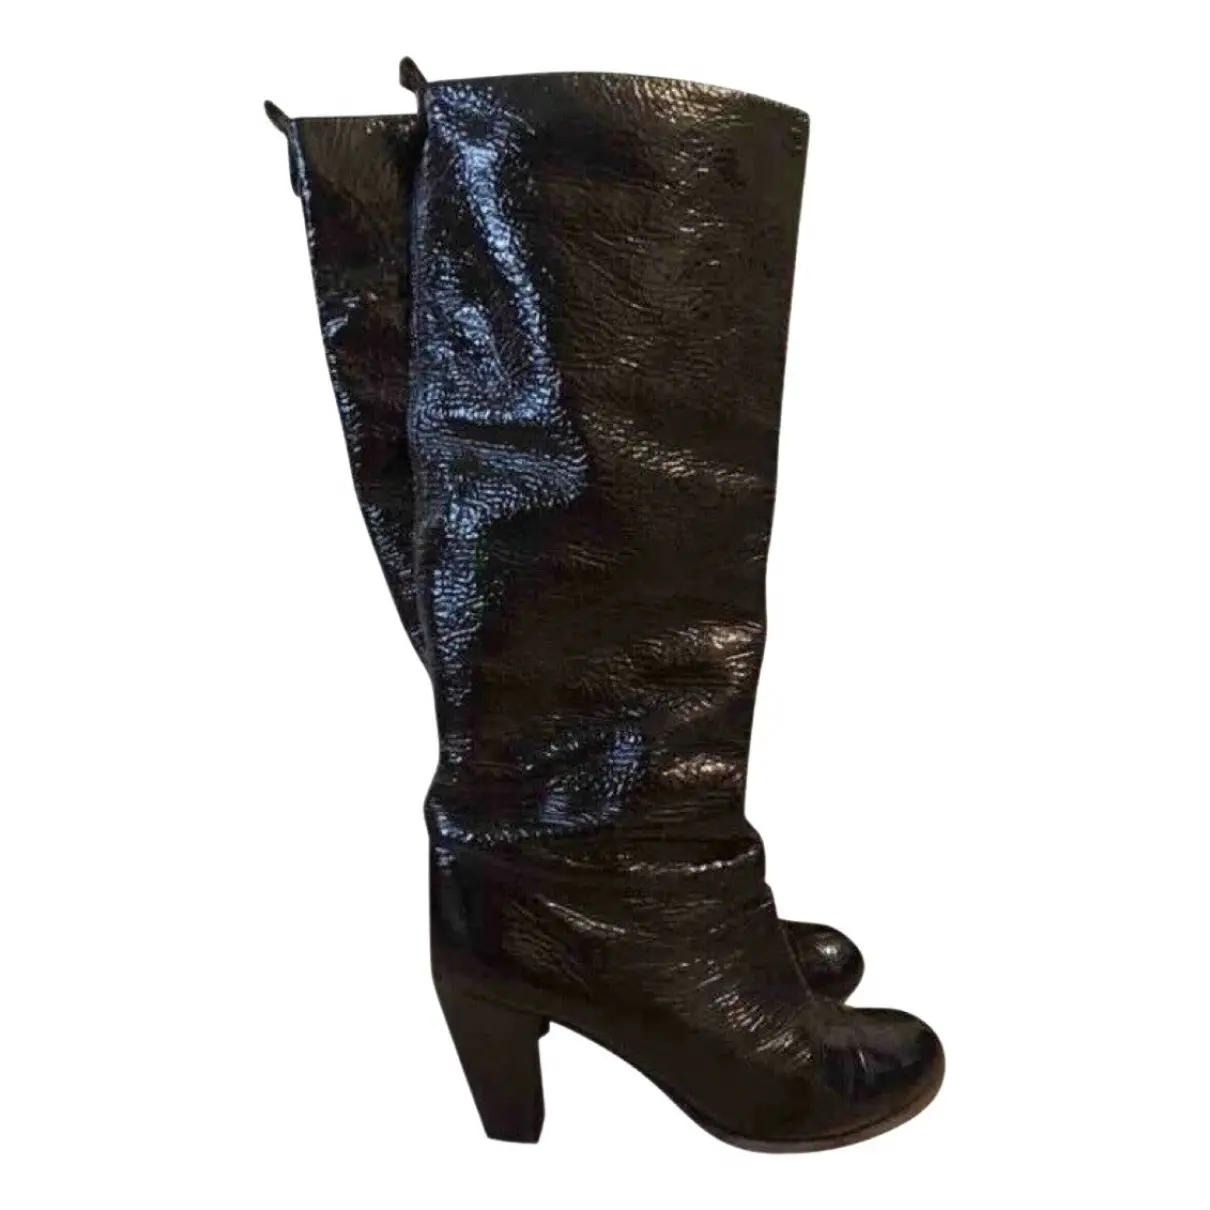 Patent leather boots Kenzo